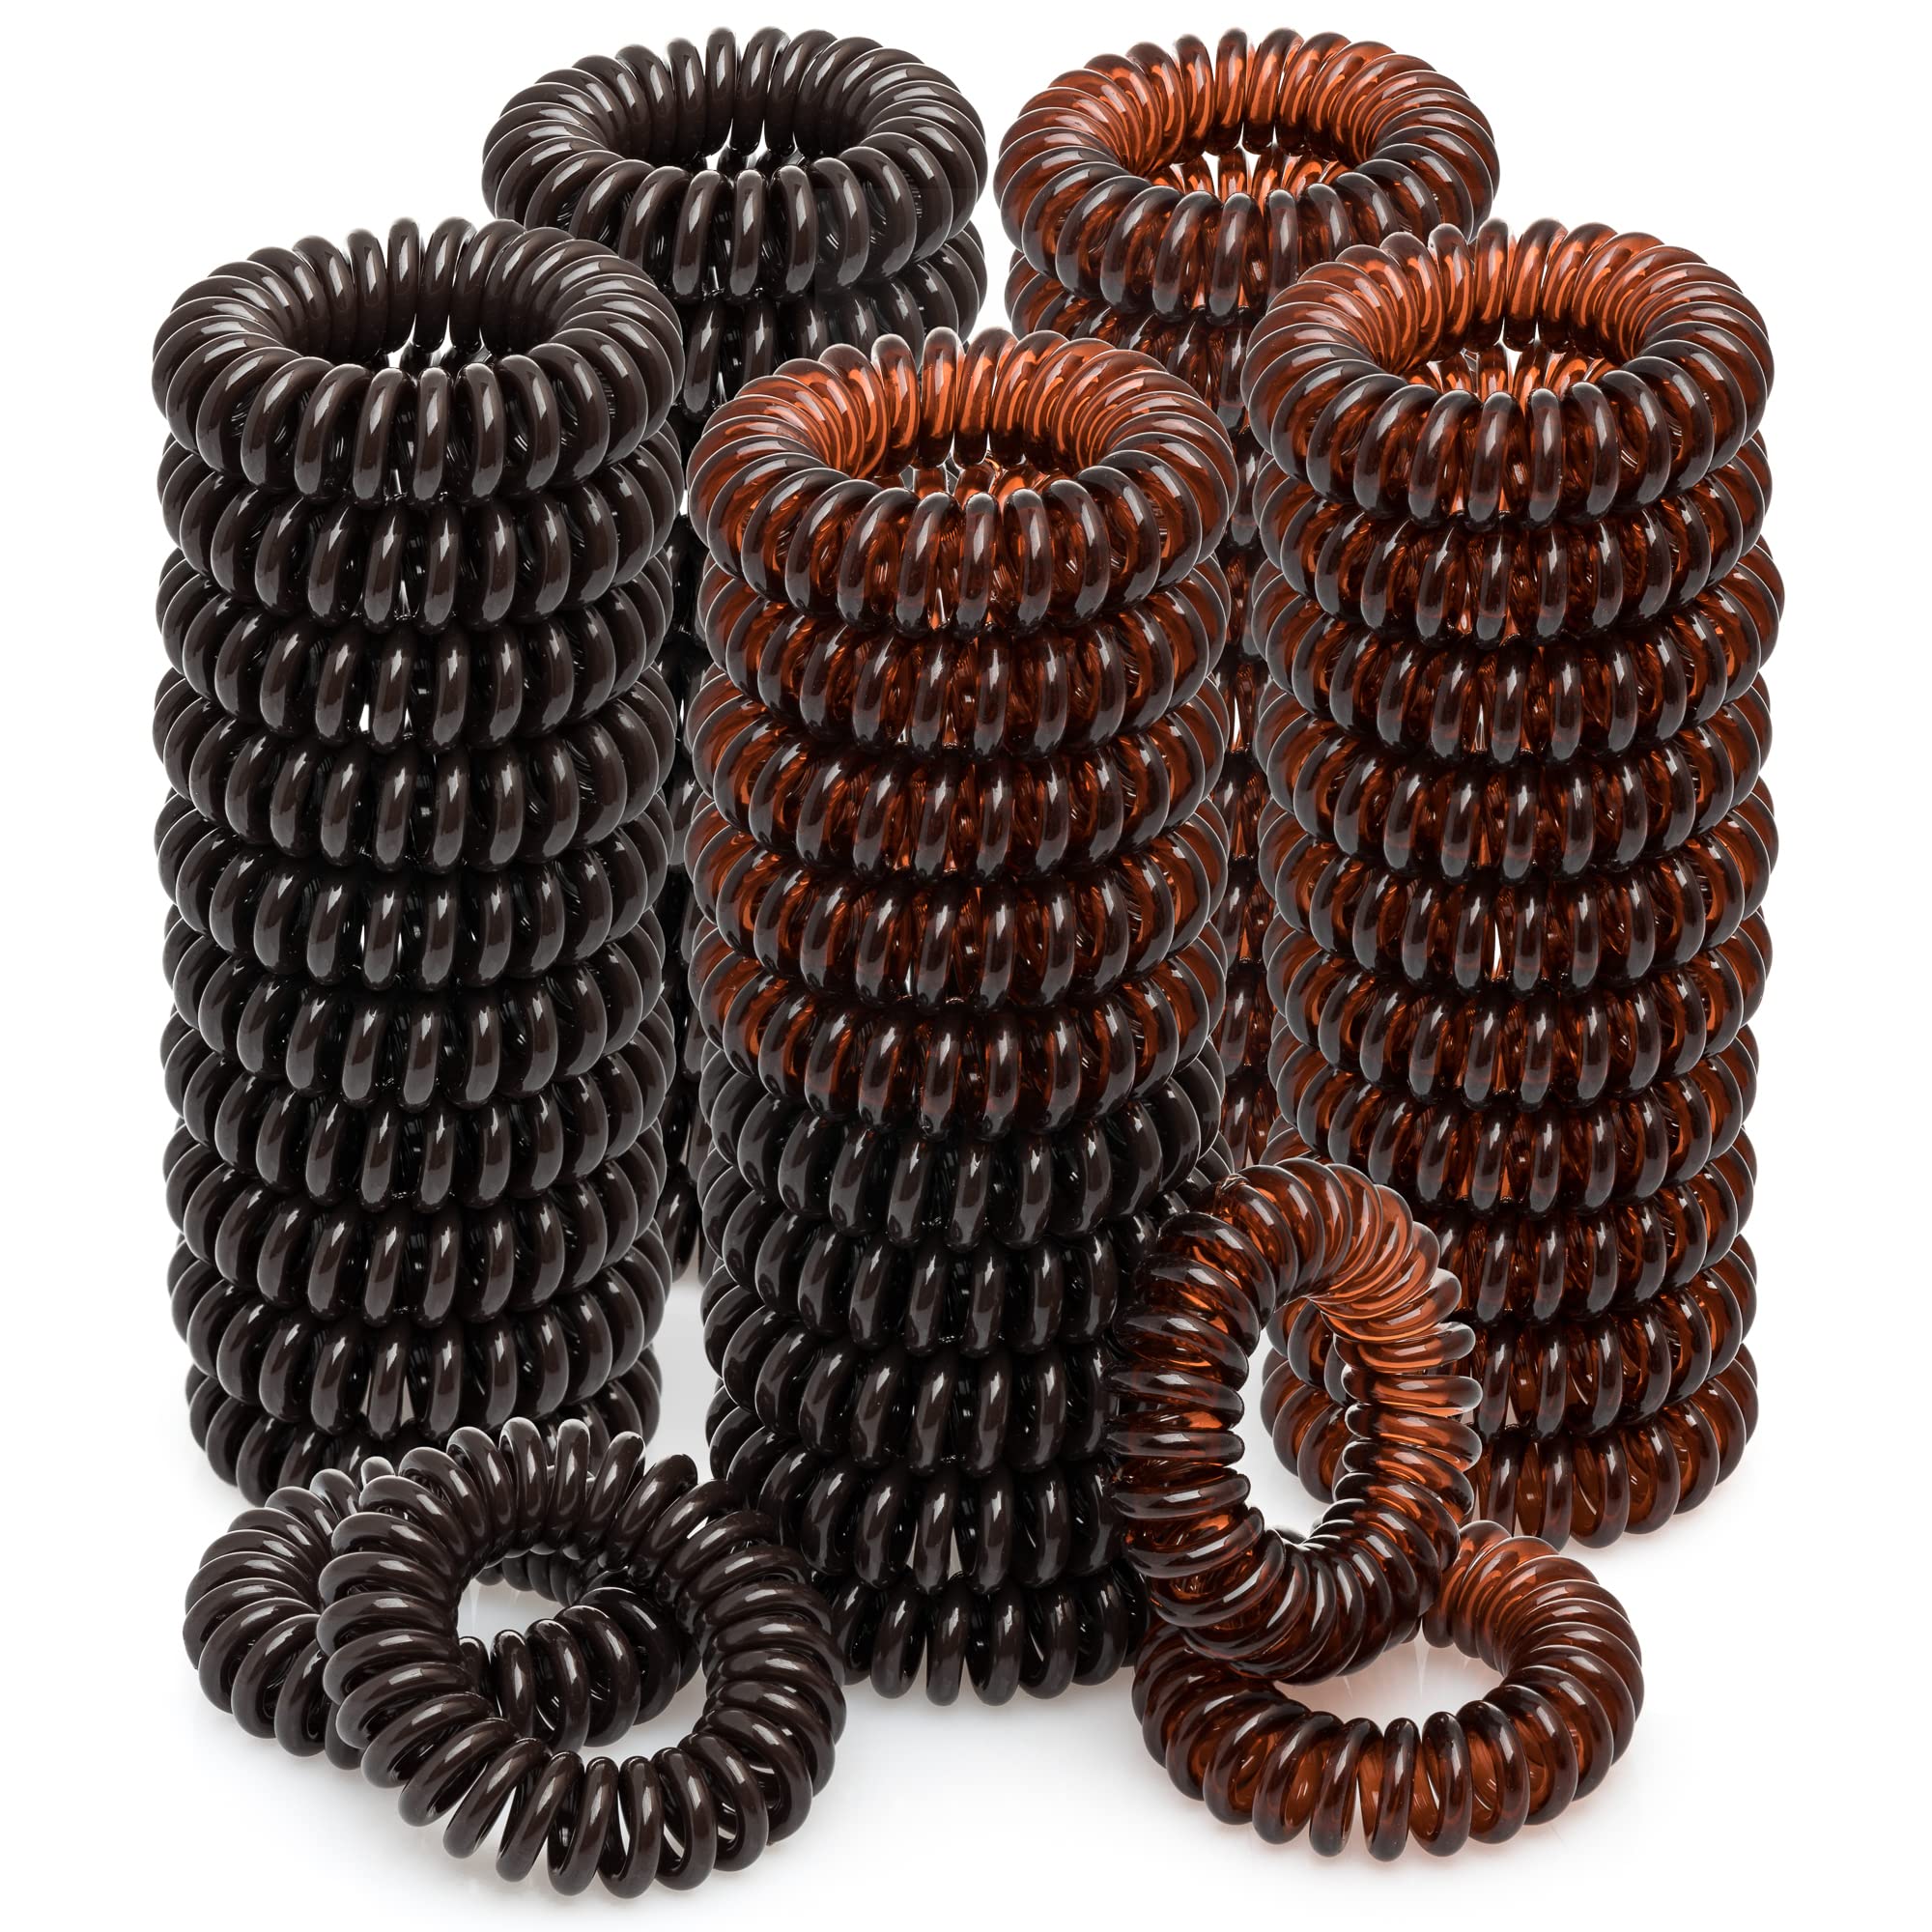 54 Pcs Spiral Hair Ties for Women Girls Coil Hair Ties Waterproof Plastic  Phone Cord No Damage Crease Pull Hair Coils for Thin Curly Hair Bobbles -  Ponytail Holders Brown Brown Semi Brown